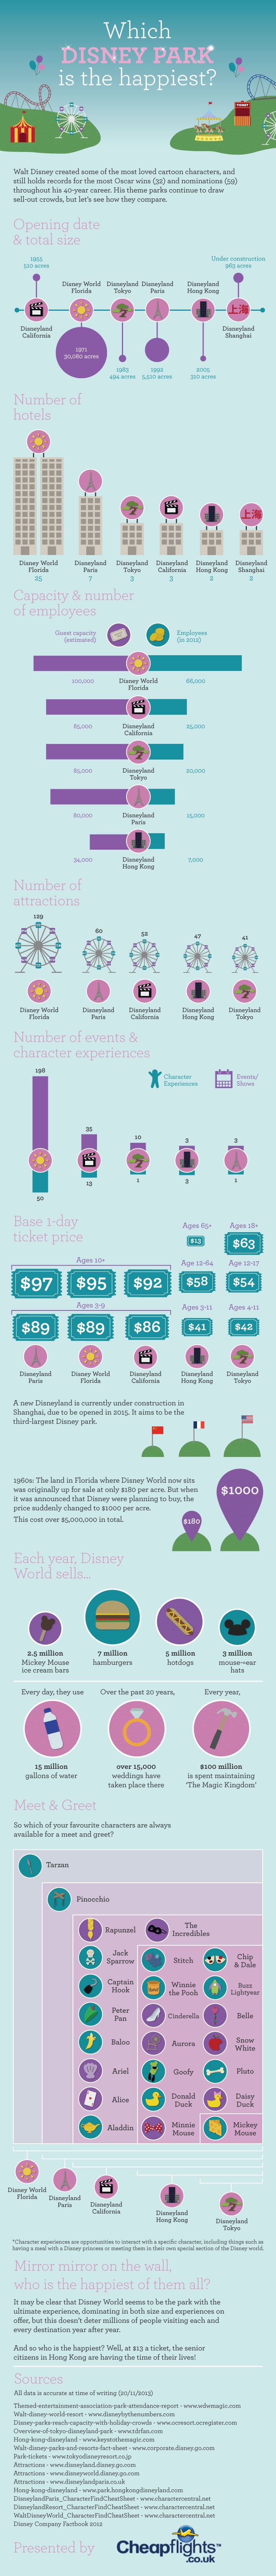 Which Disney Park is the Happiest [Infographic]